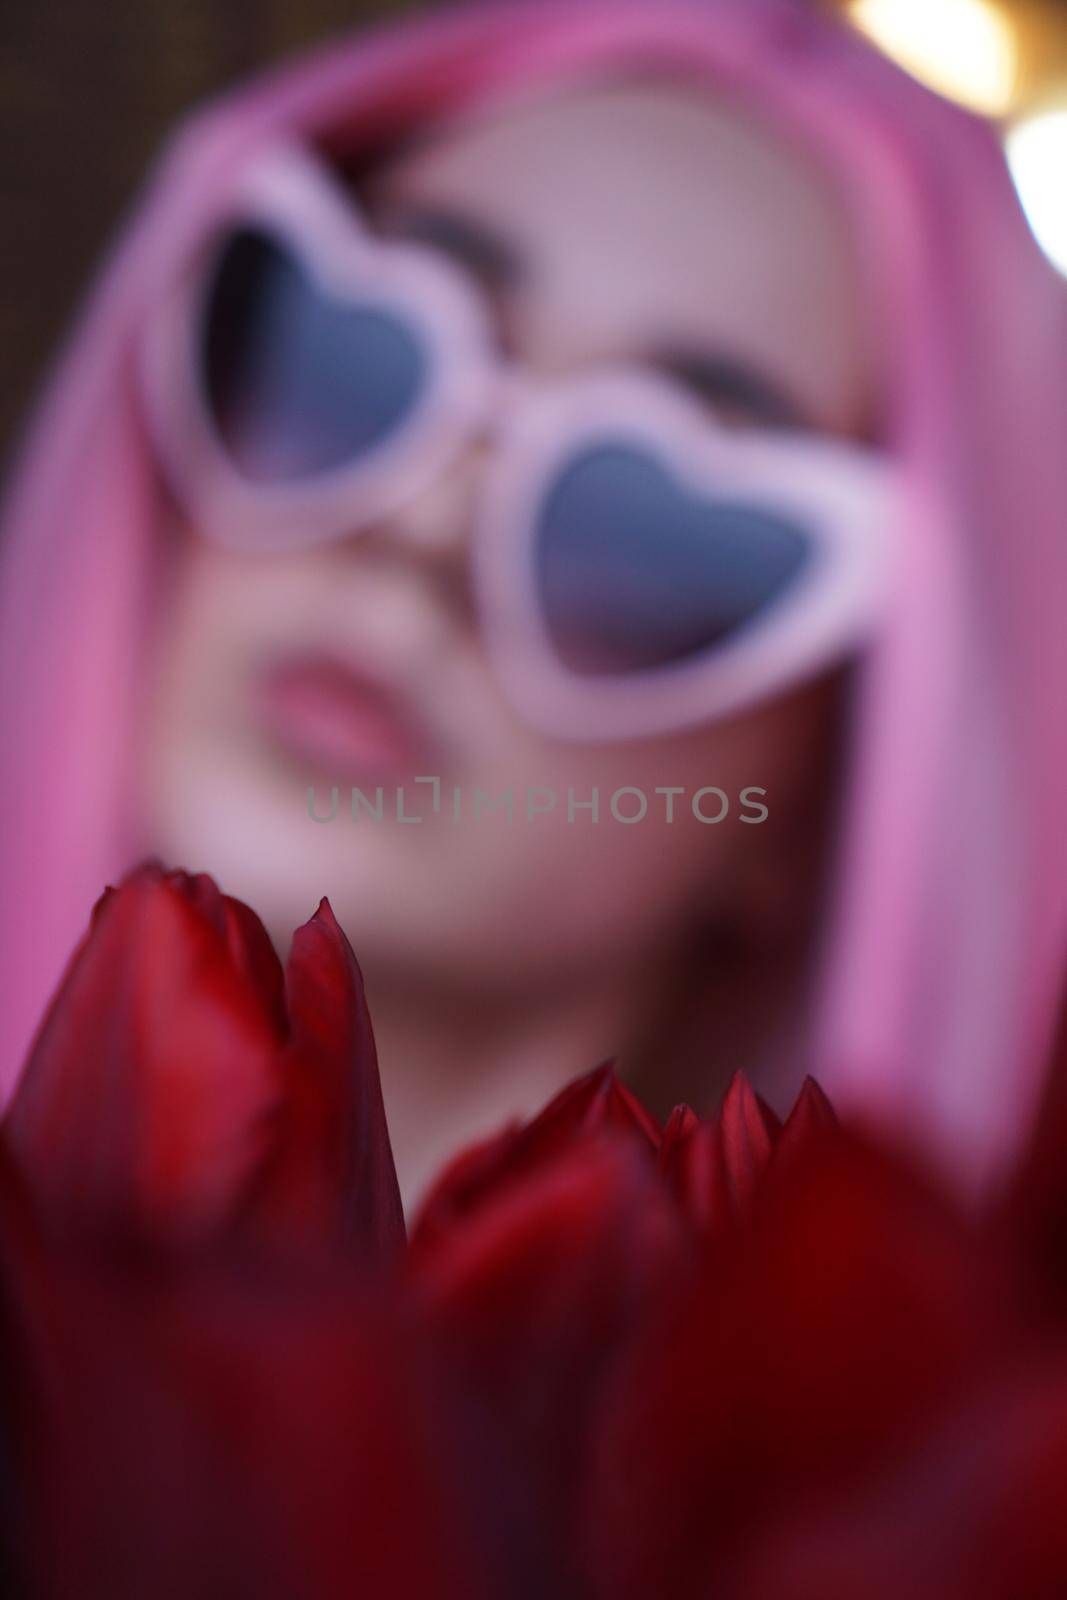 Out of focus, blurred background. Portrait of a dreamy girl with bright pink hair with flowers close to face. Looking to the side